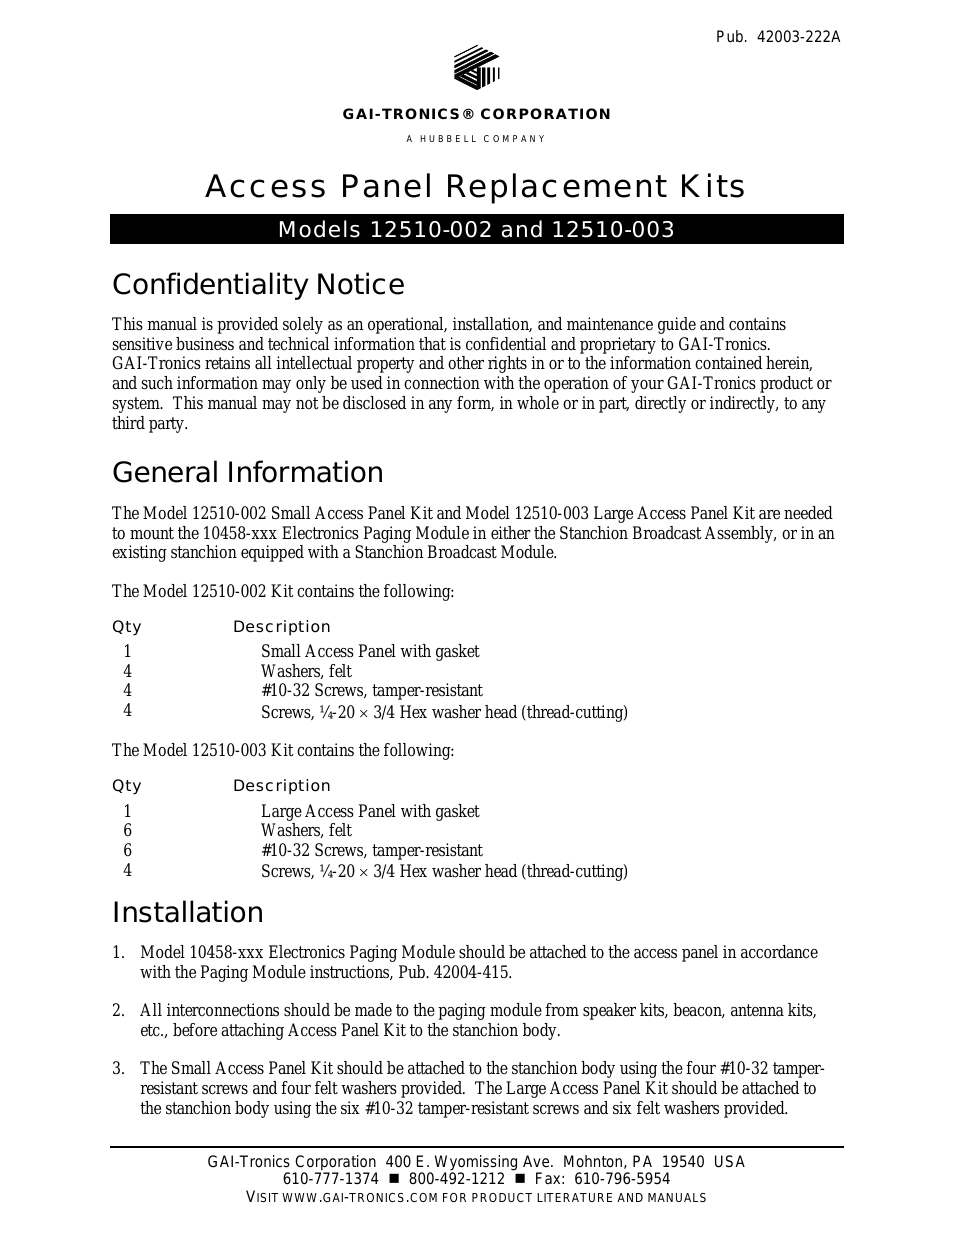 12510-002, 12510-003 Access Panels Replacement Kits